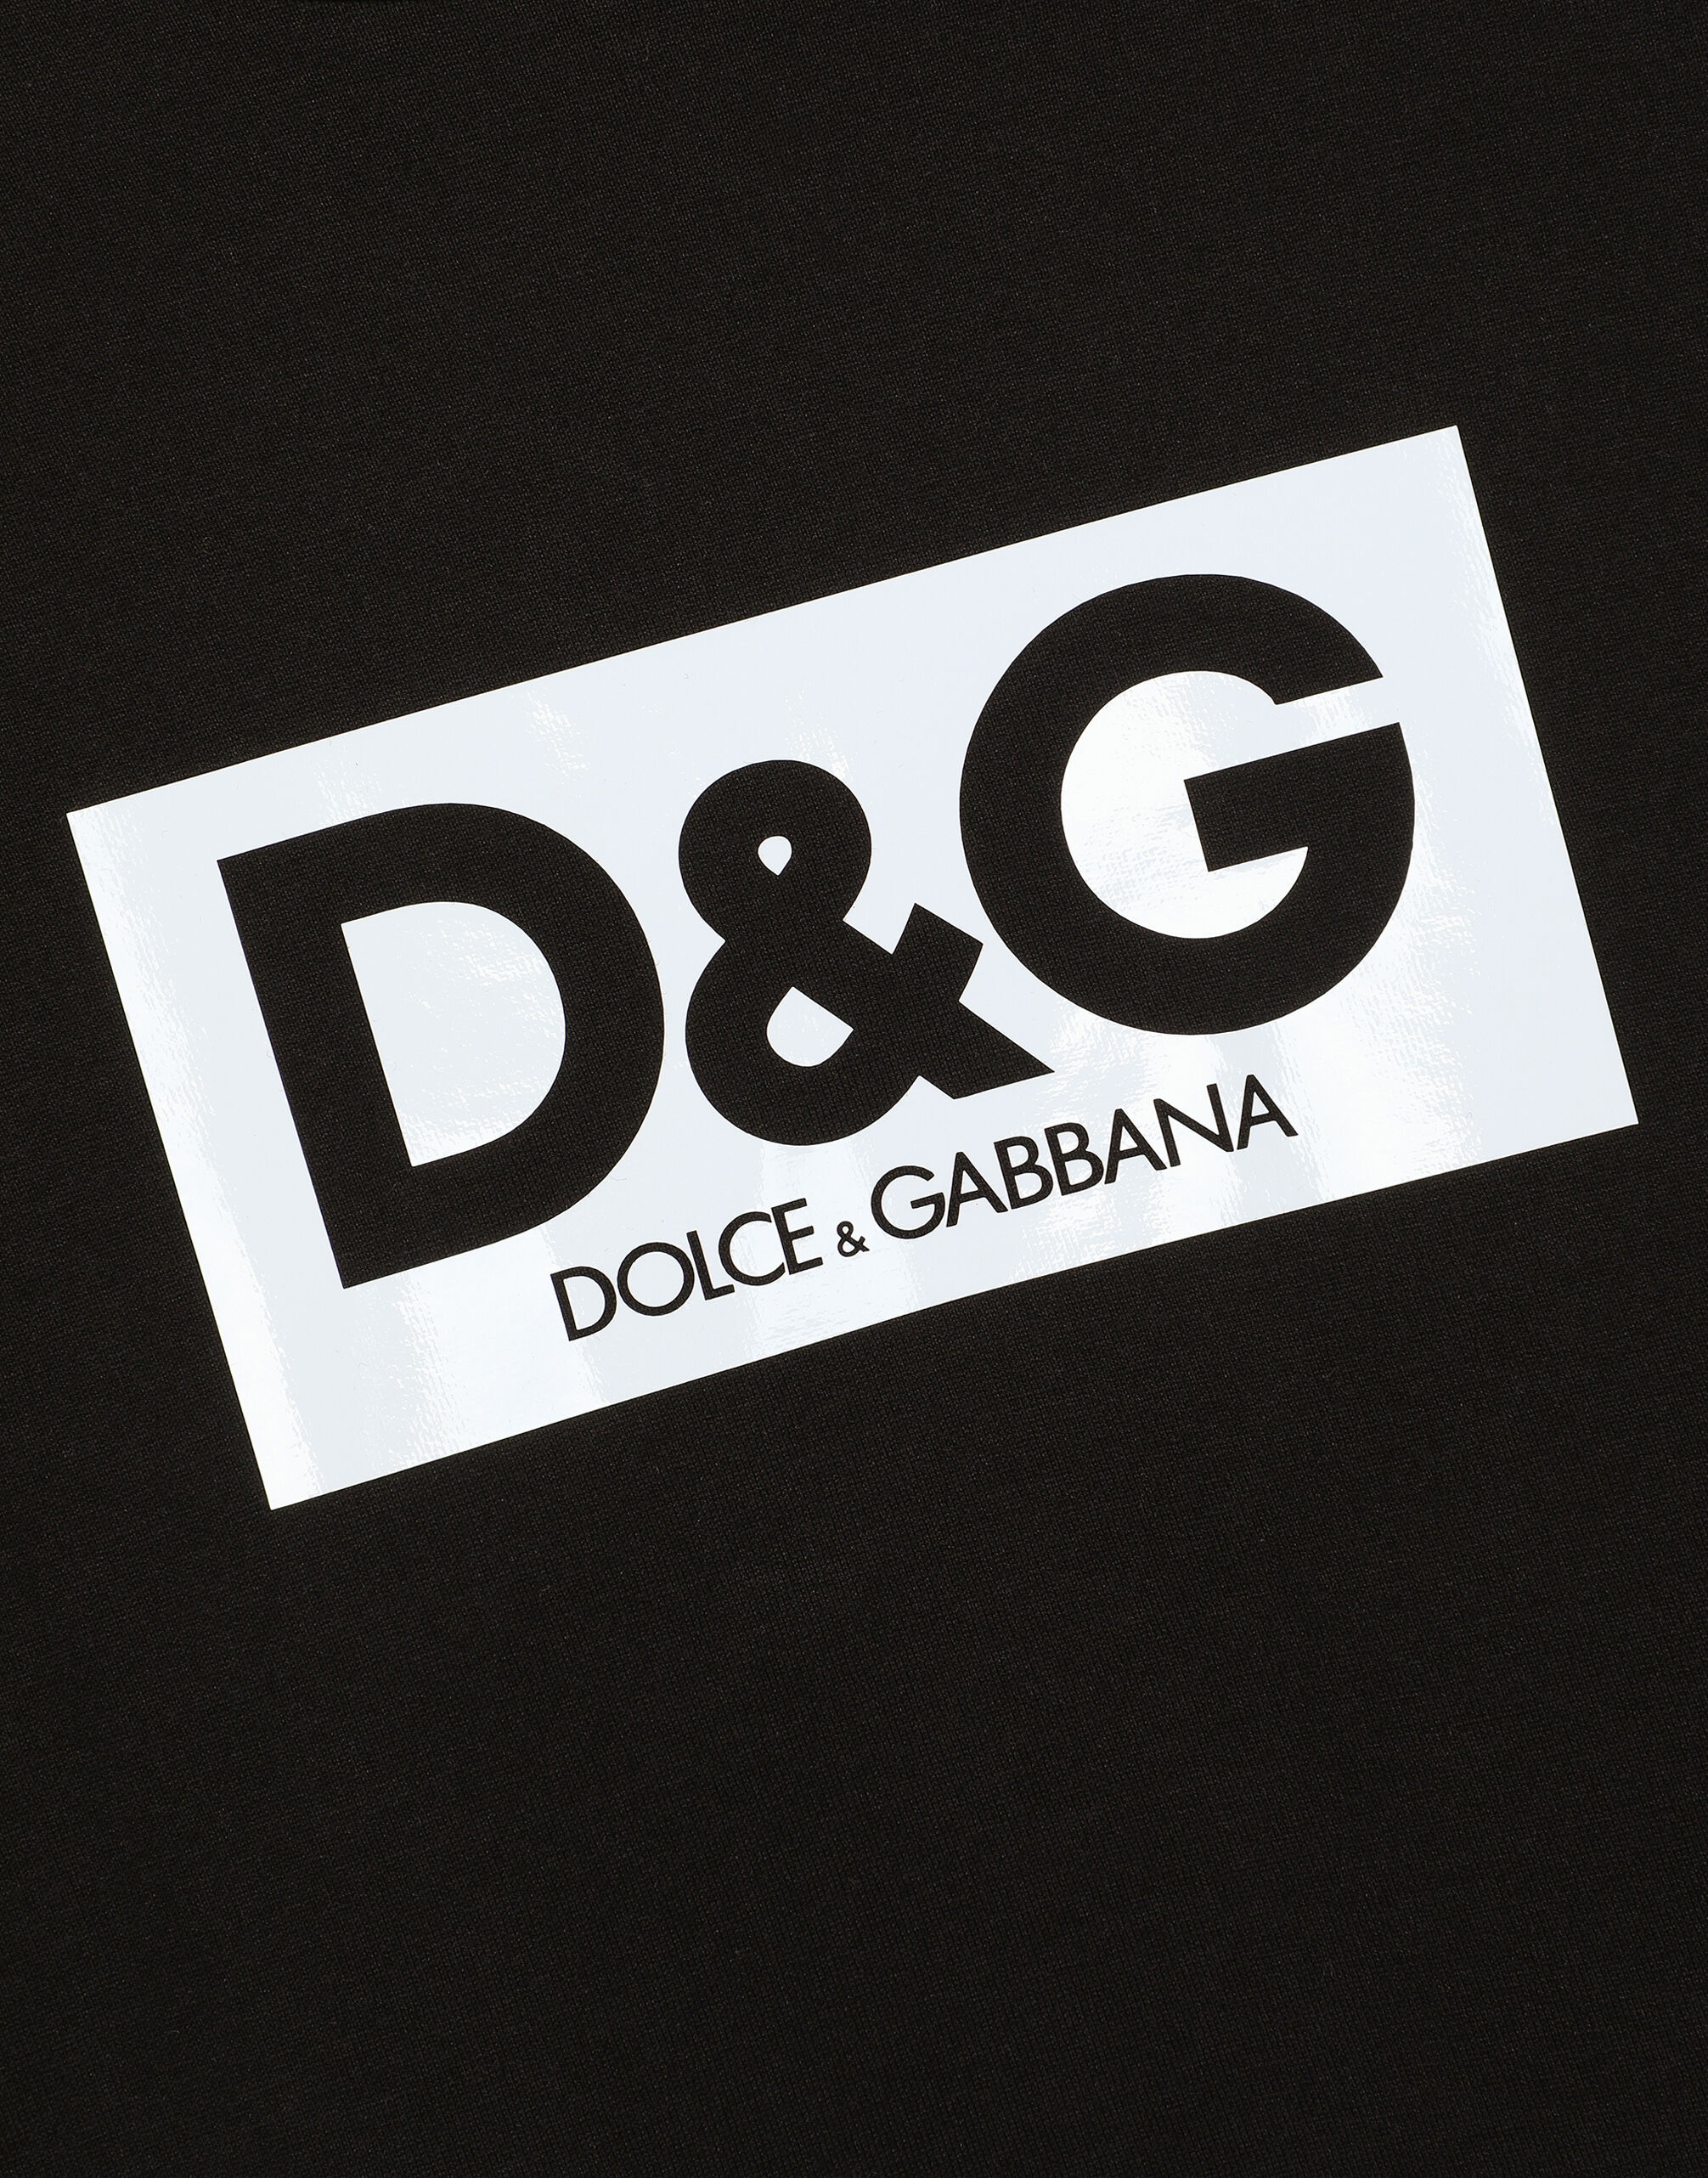 Cotton round-neck T-shirt with patch in Black for for Men | Dolceu0026Gabbana®  US